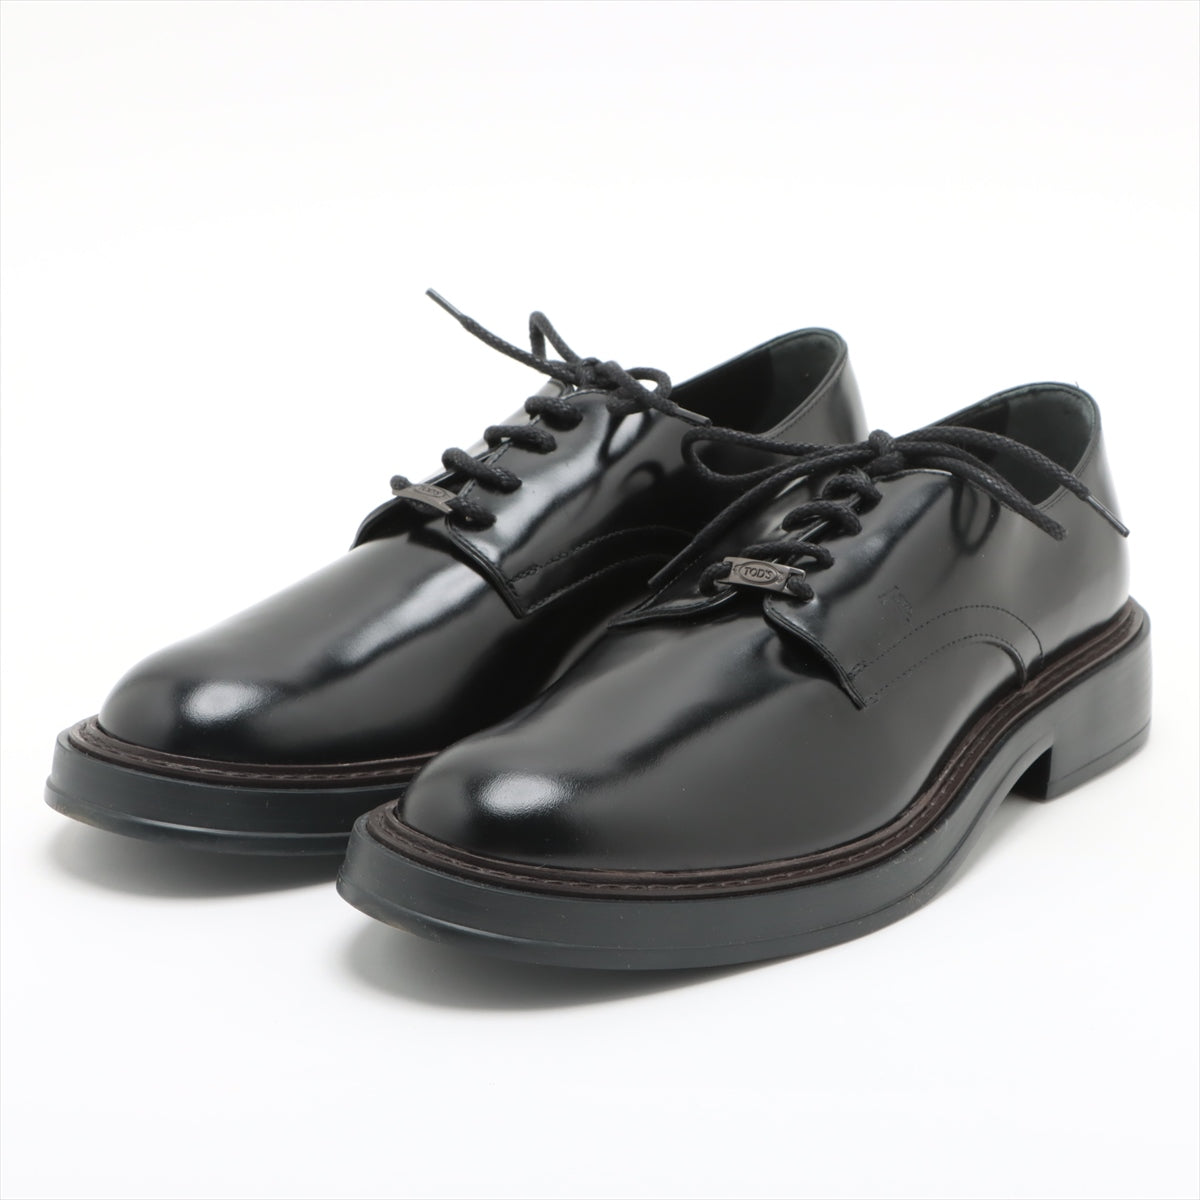 Tod's Leather Leather shoes 9 Men's Black DERBY PASSAL